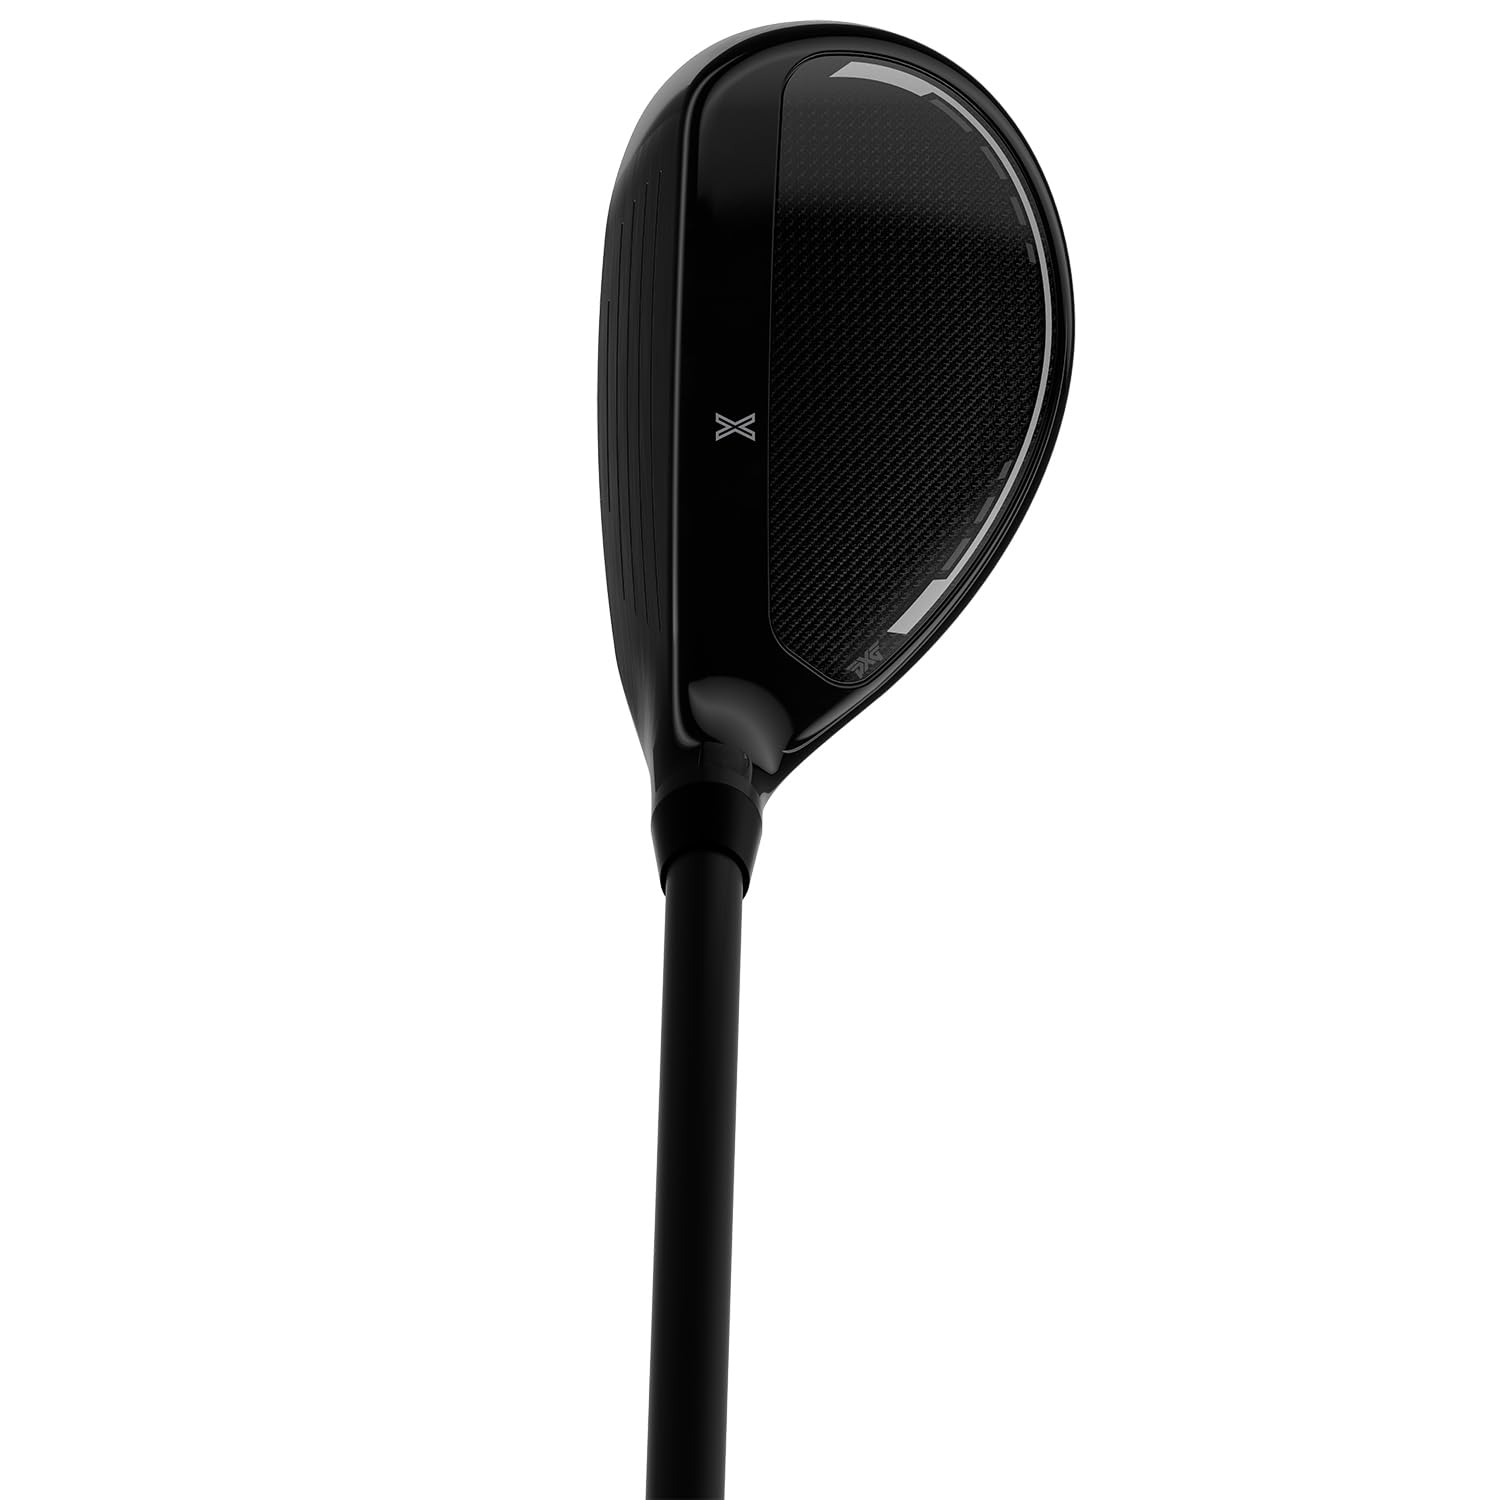 PXG Hybrid Golf Club - 0311 Black Ops Right Handed Hybrid Club in 19, 22, or 25 Degree Lofts with Adjustable Loft and Lie Hosel Available in Stiff, Regular, Senior, or Ladies Flex Graphite Shaft